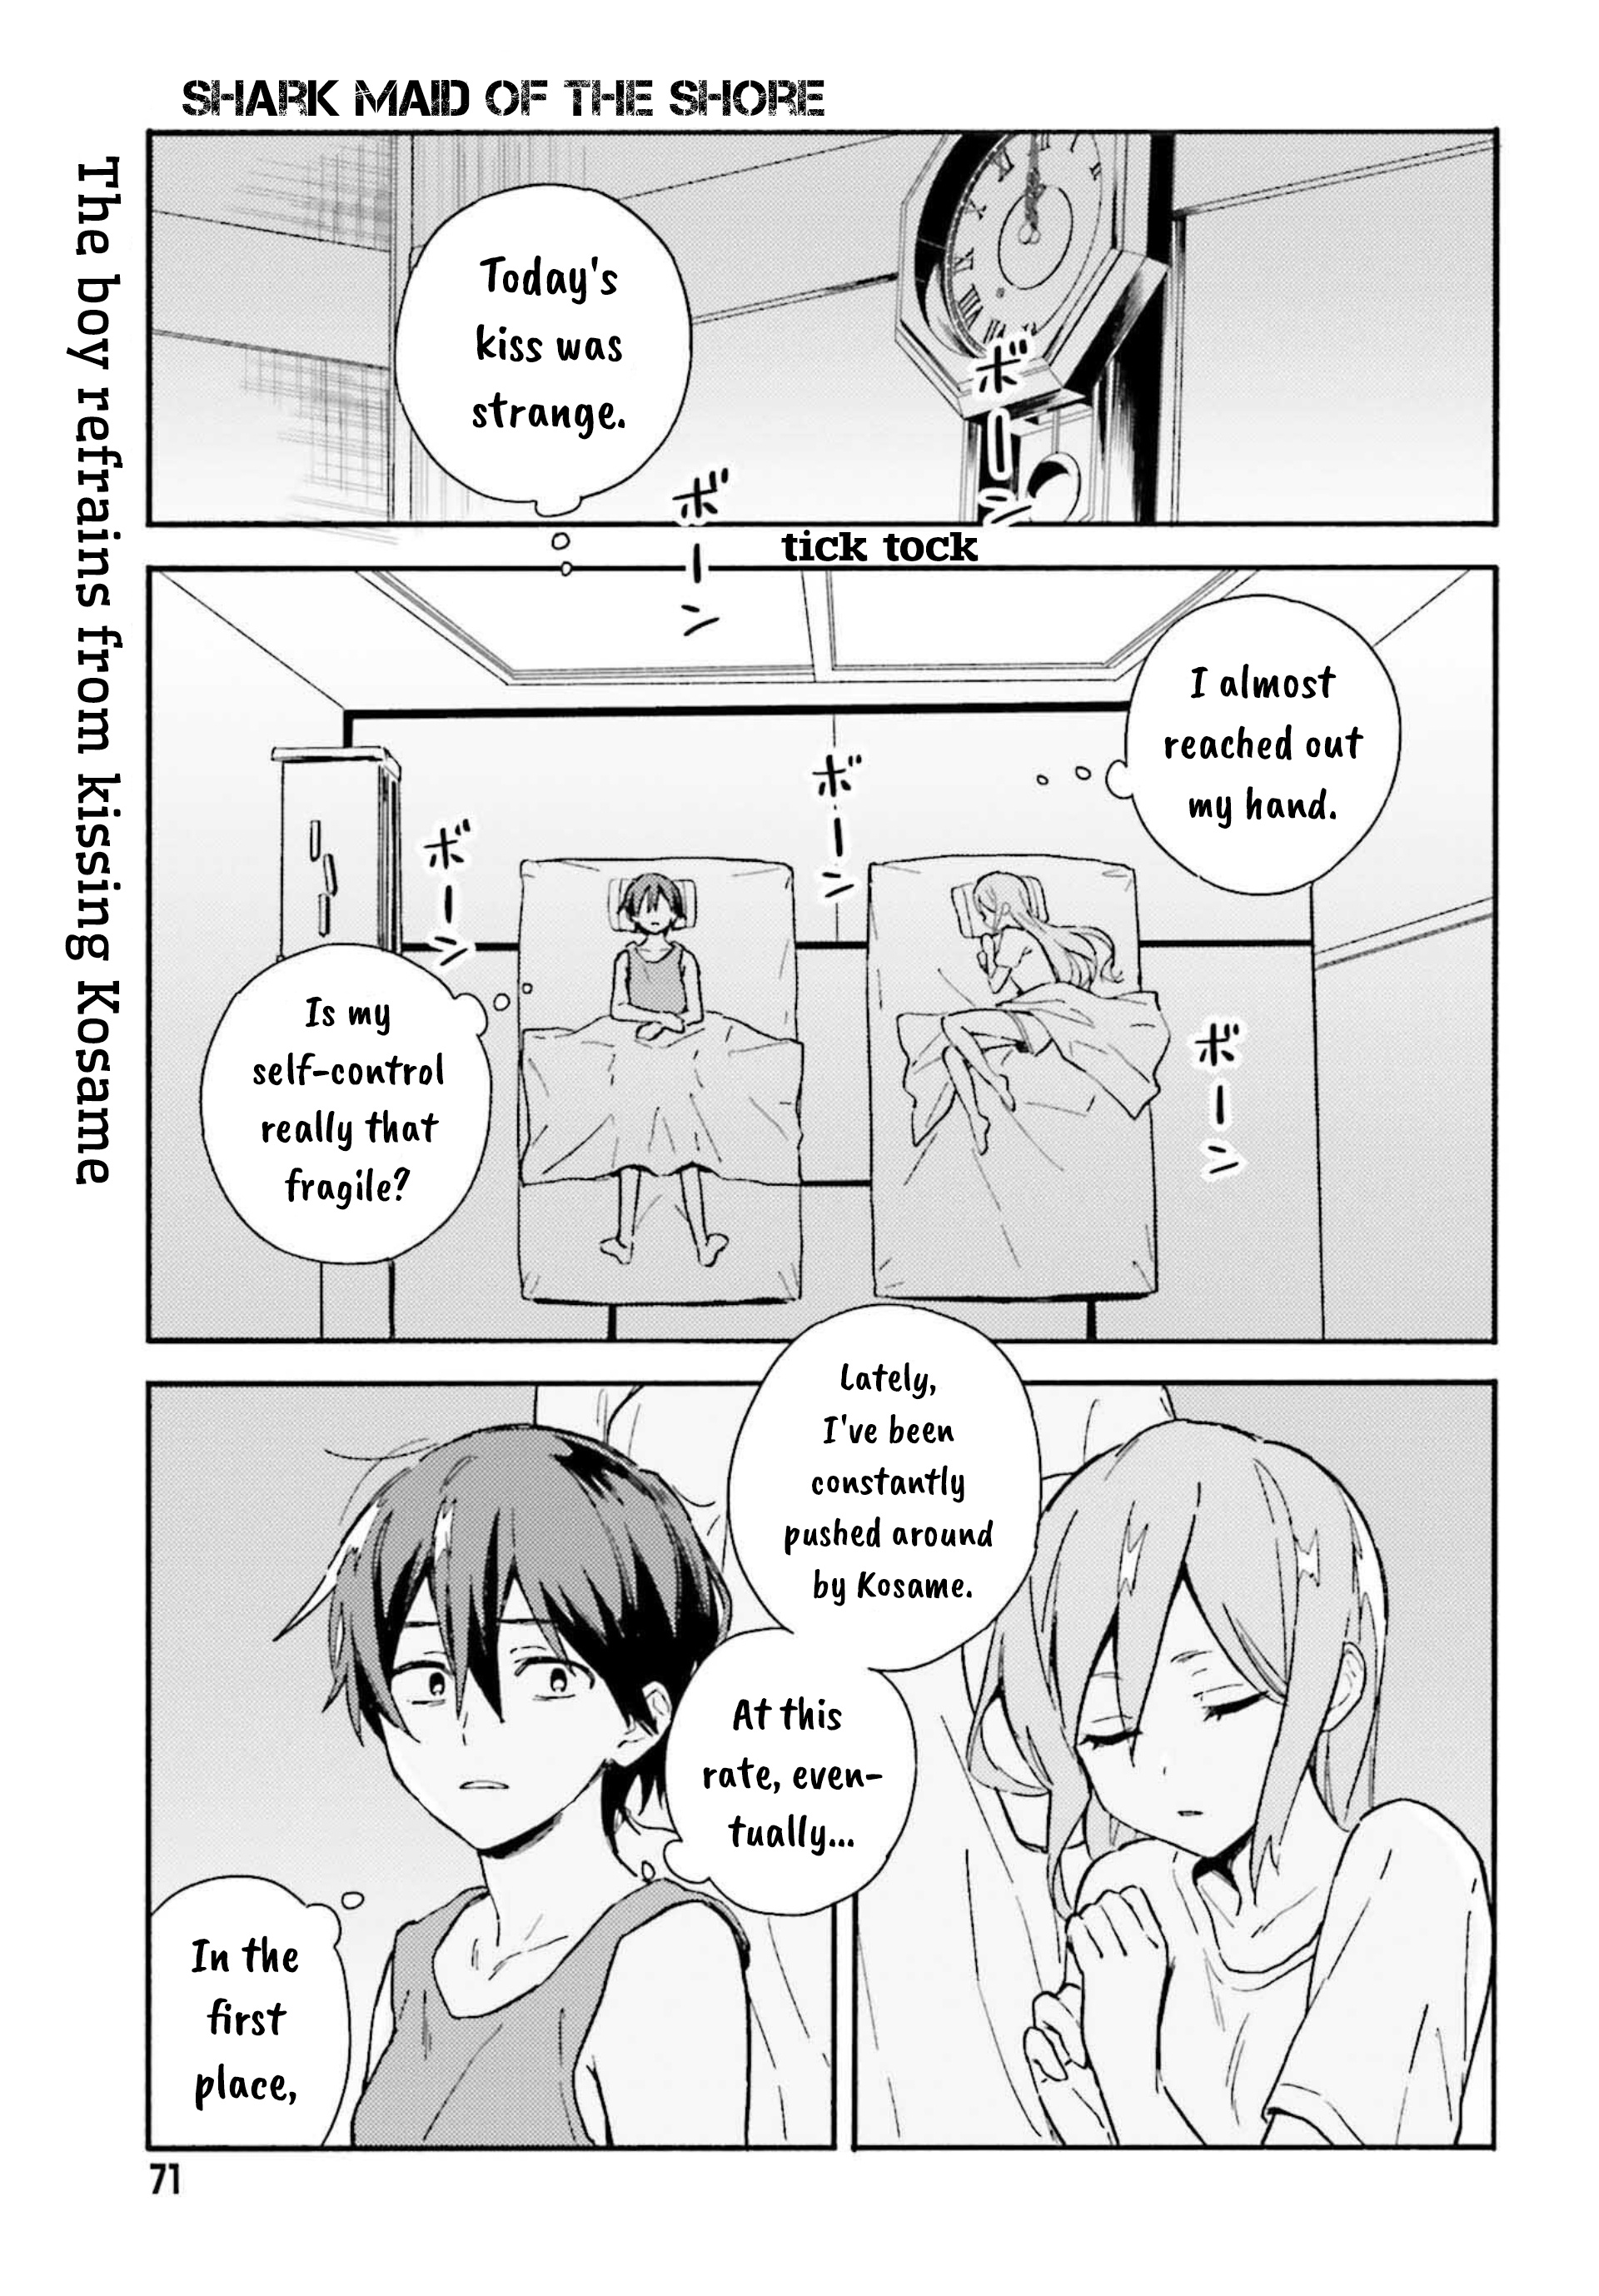 Shark Maid Of The Shore Vol.1 Chapter 4: Wataru's Family - Picture 1